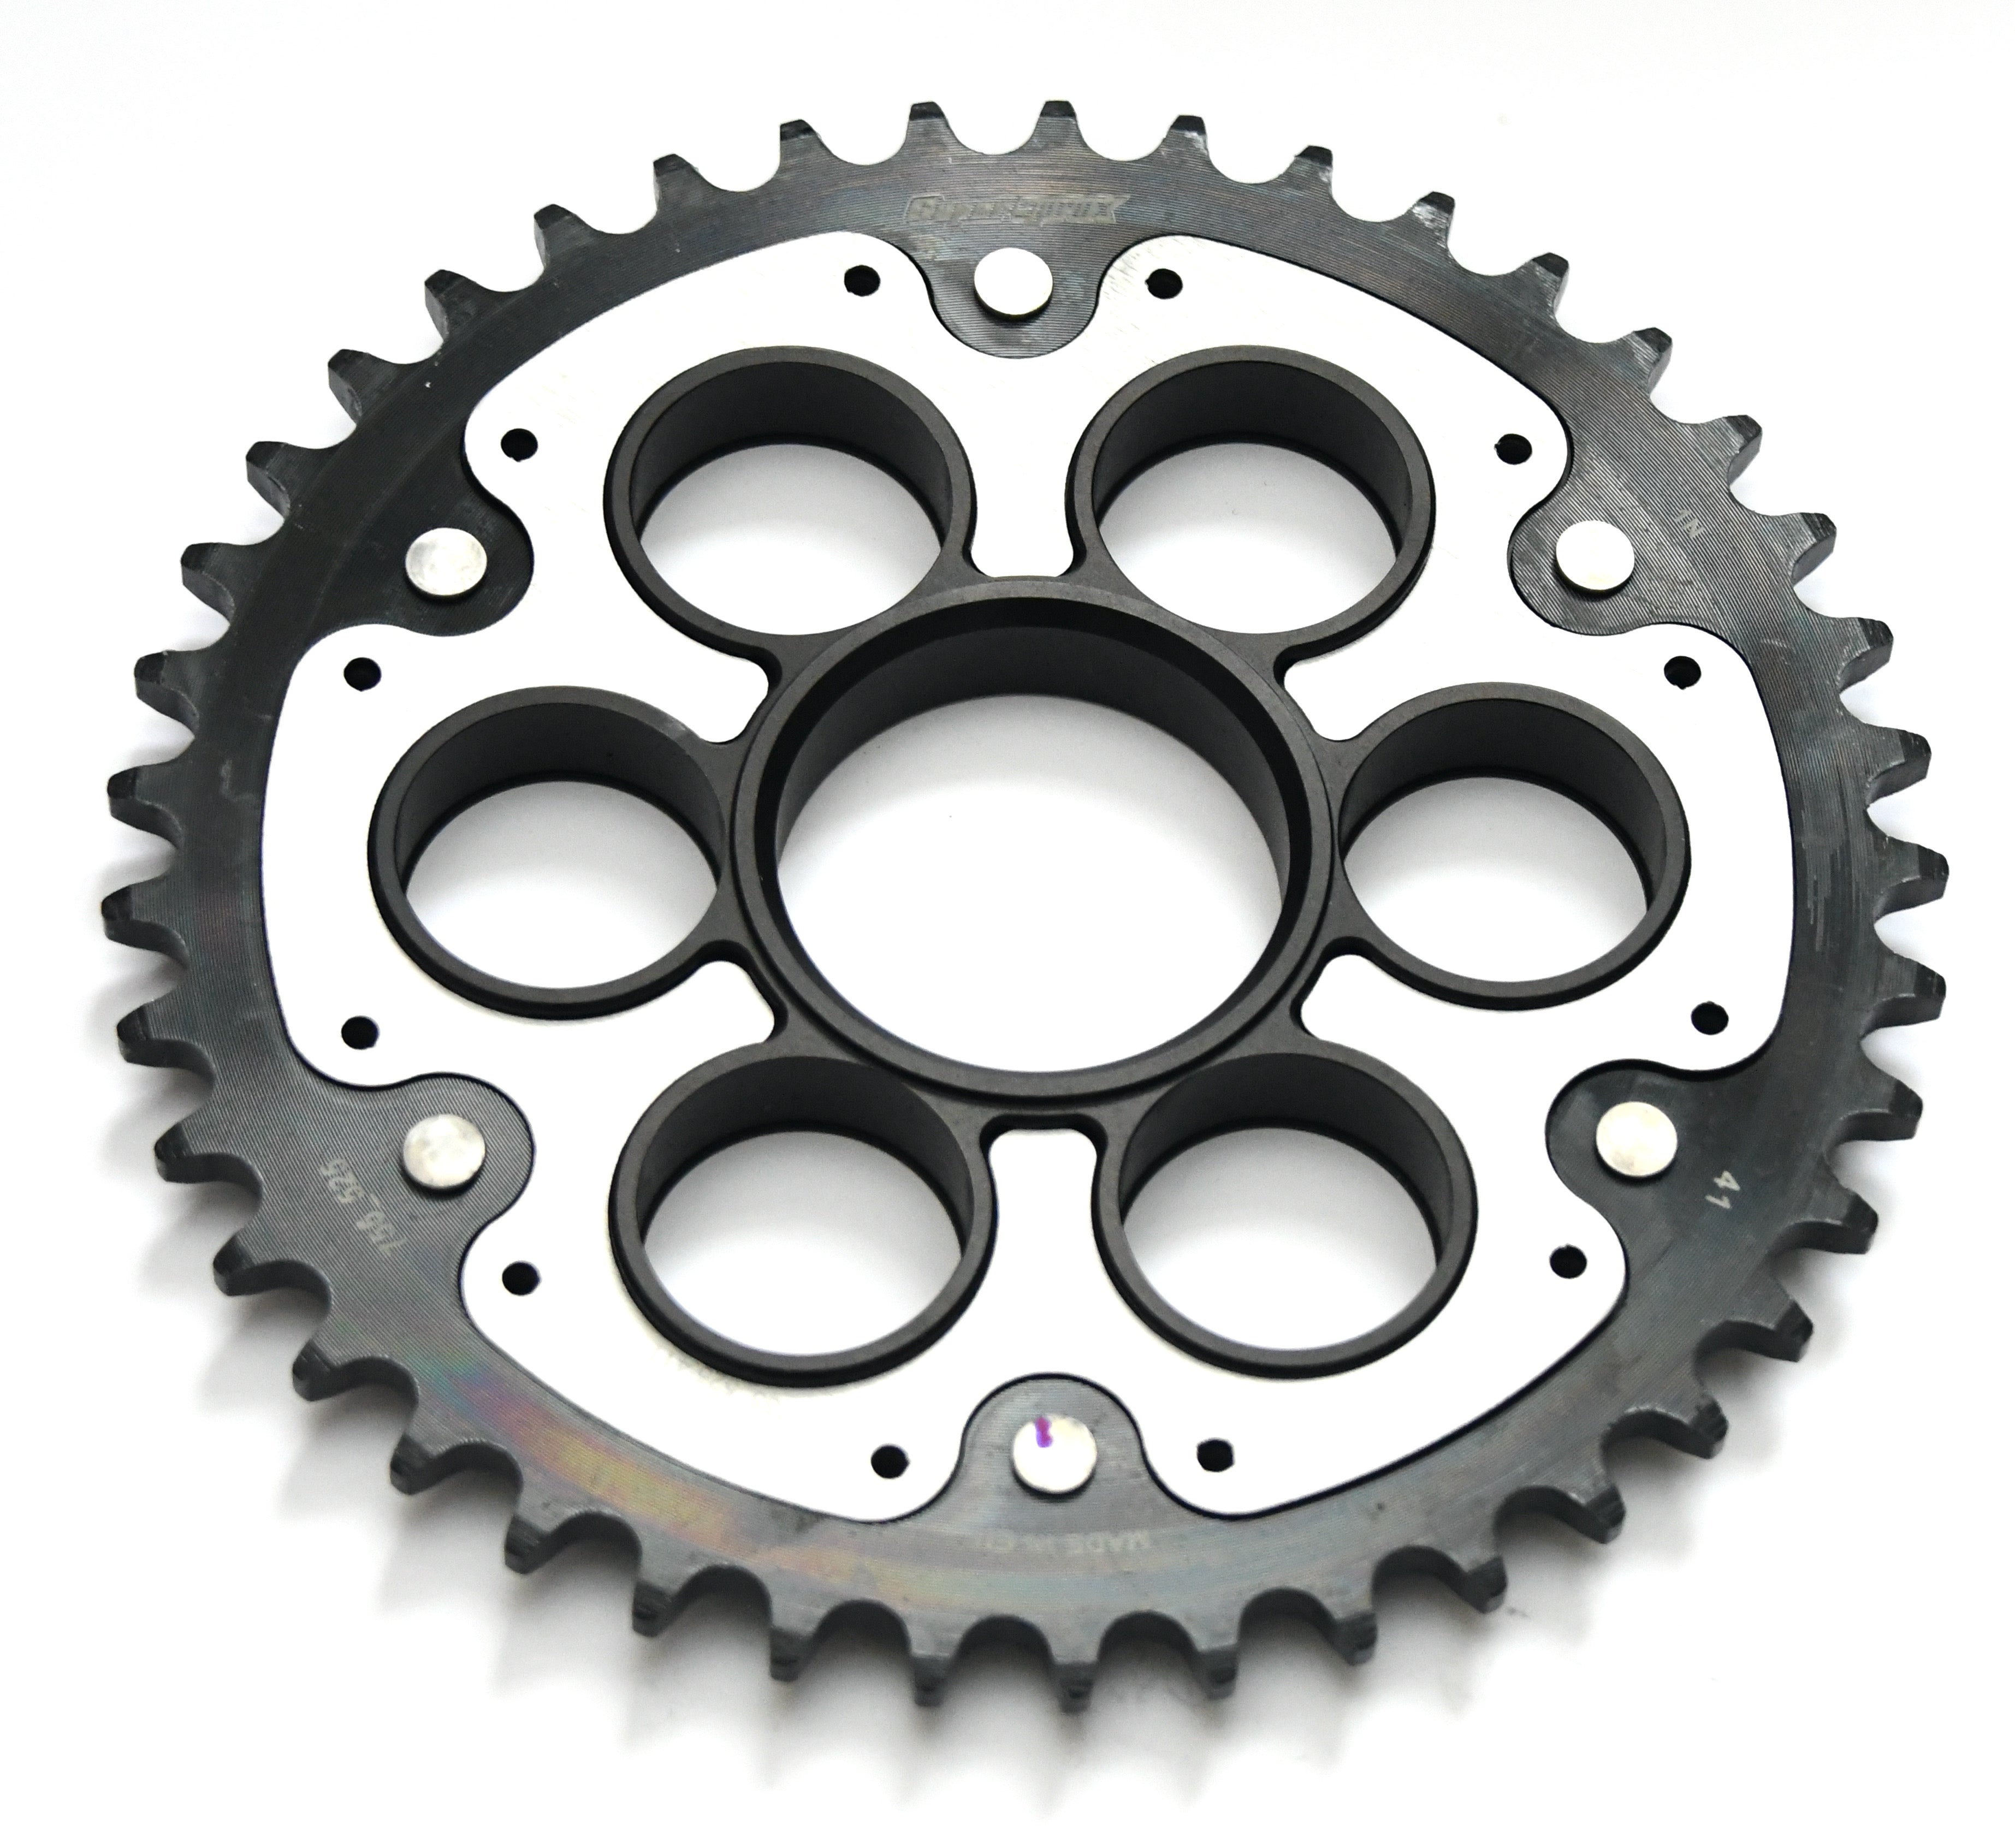 Supersprox Edge Stealth Rear Sprocket RSA-755_525 - Choose Your Gearing